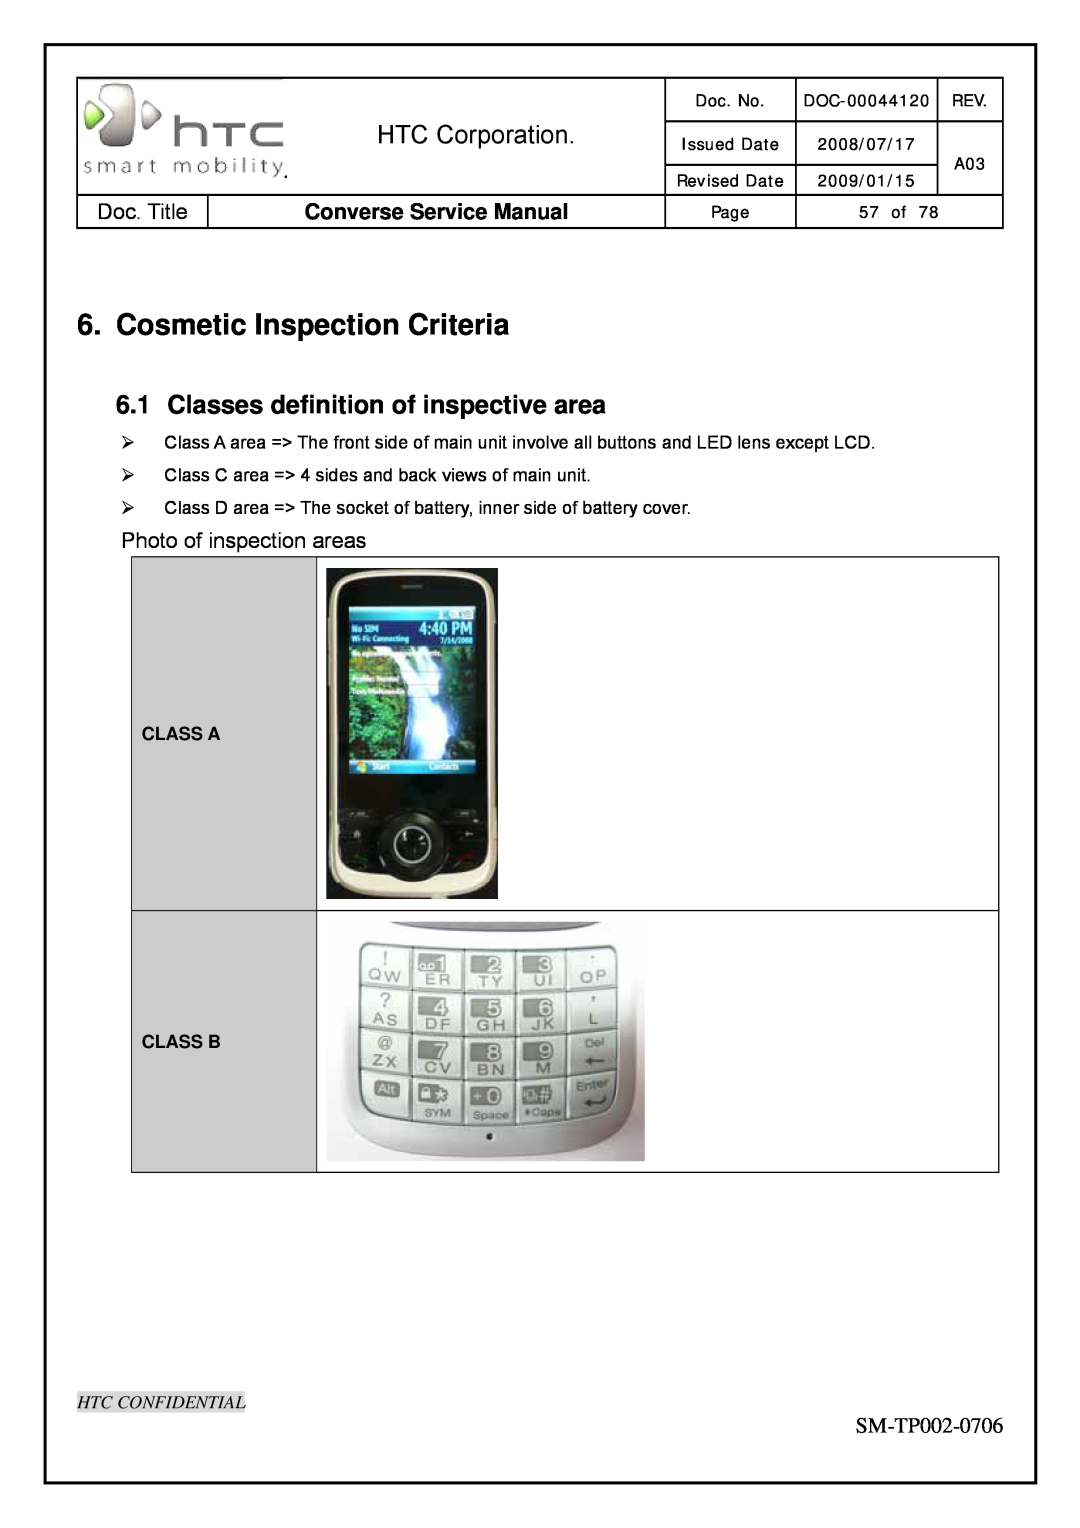 HTC SM-TP002-0706 Cosmetic Inspection Criteria, Classes definition of inspective area, HTC Corporation, Class A Class B 